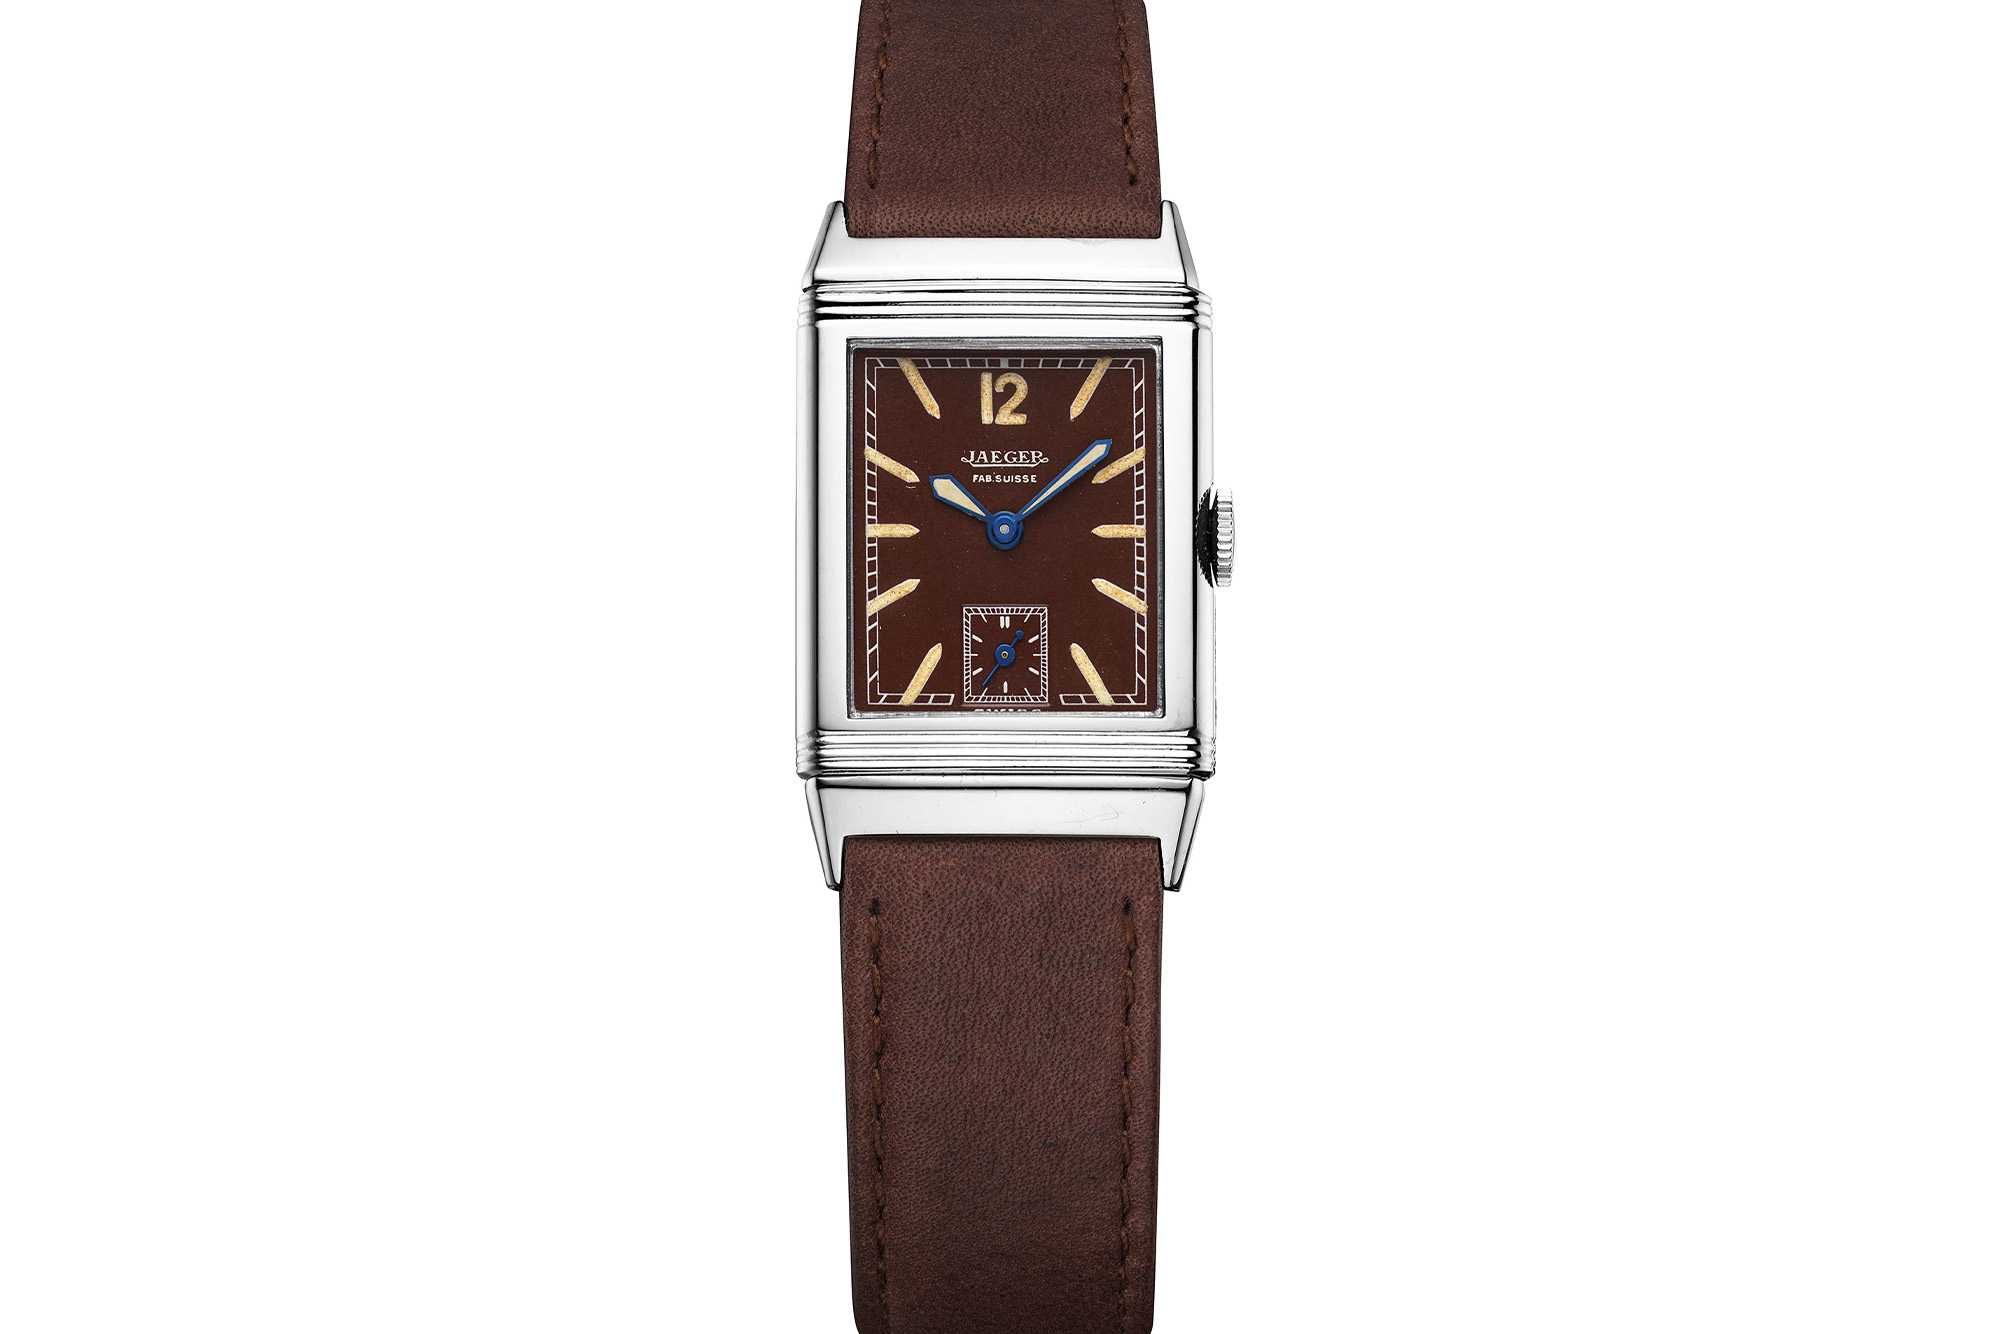 Jaeger-LeCoultre watch on white background